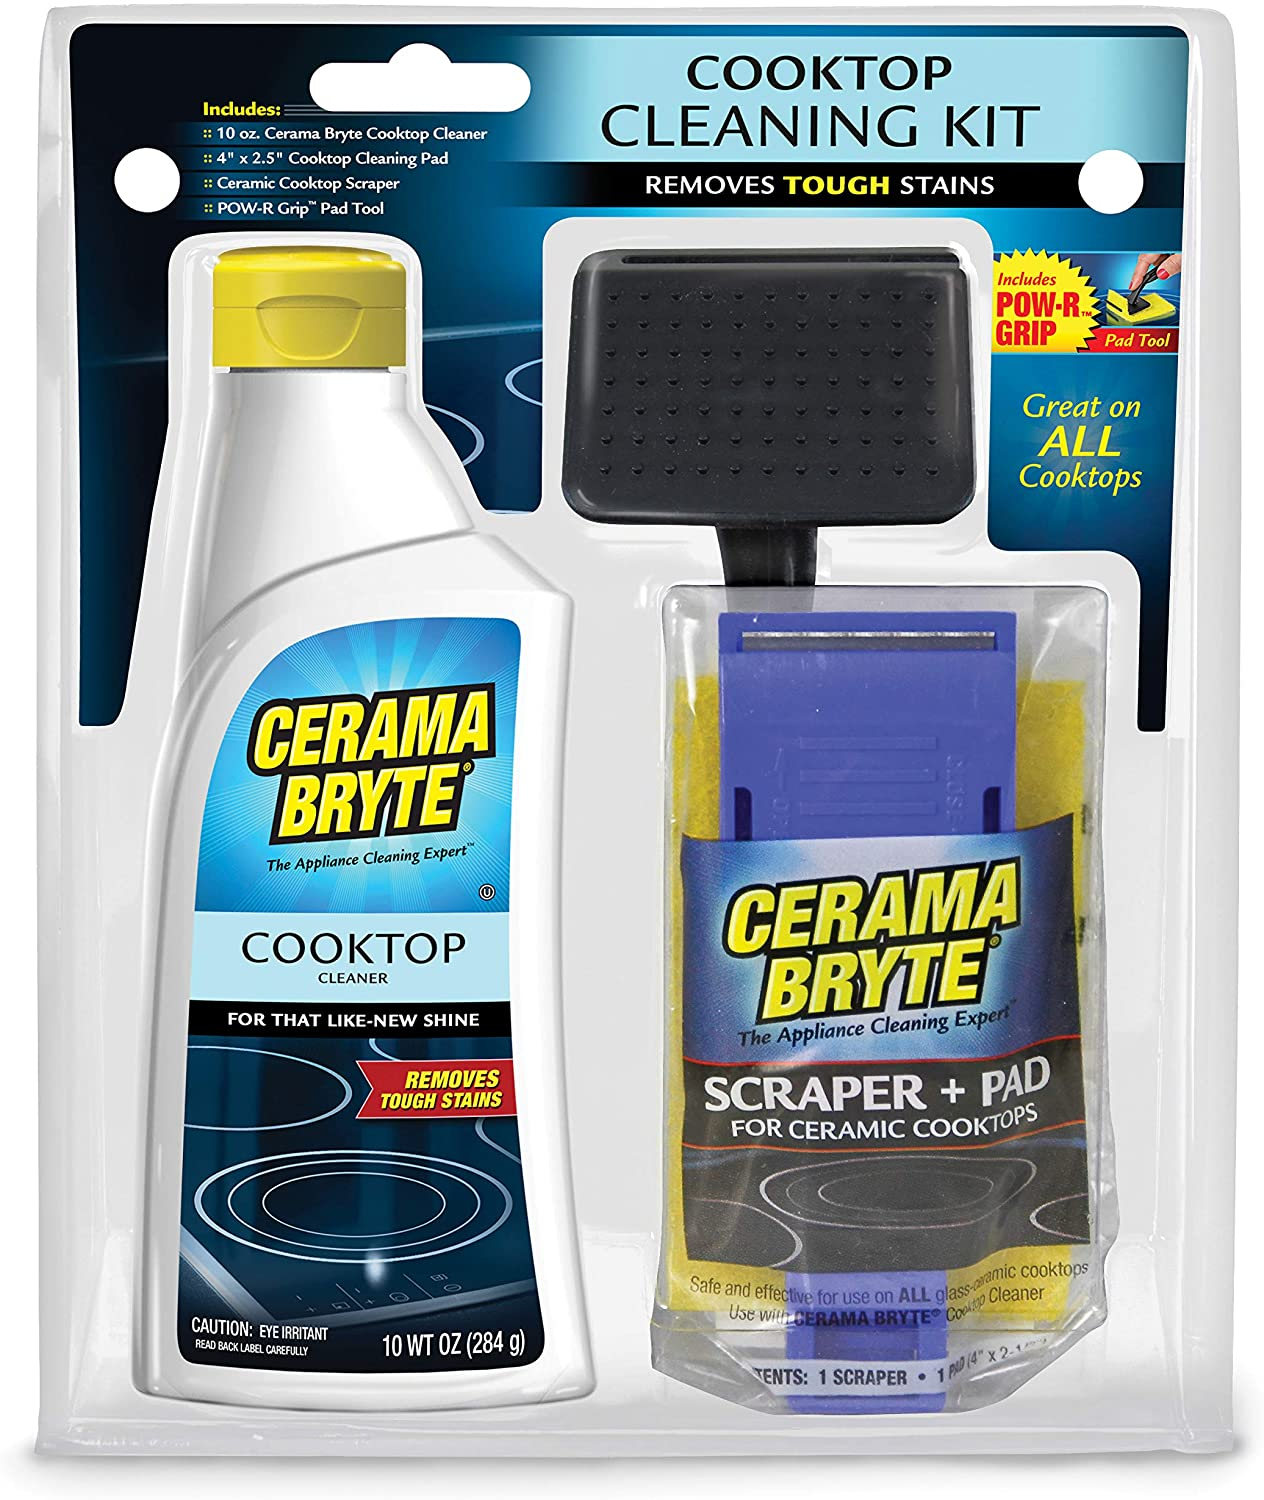 Cerama Bryte Cooktop Cleaning 3 Piece Set $11.50